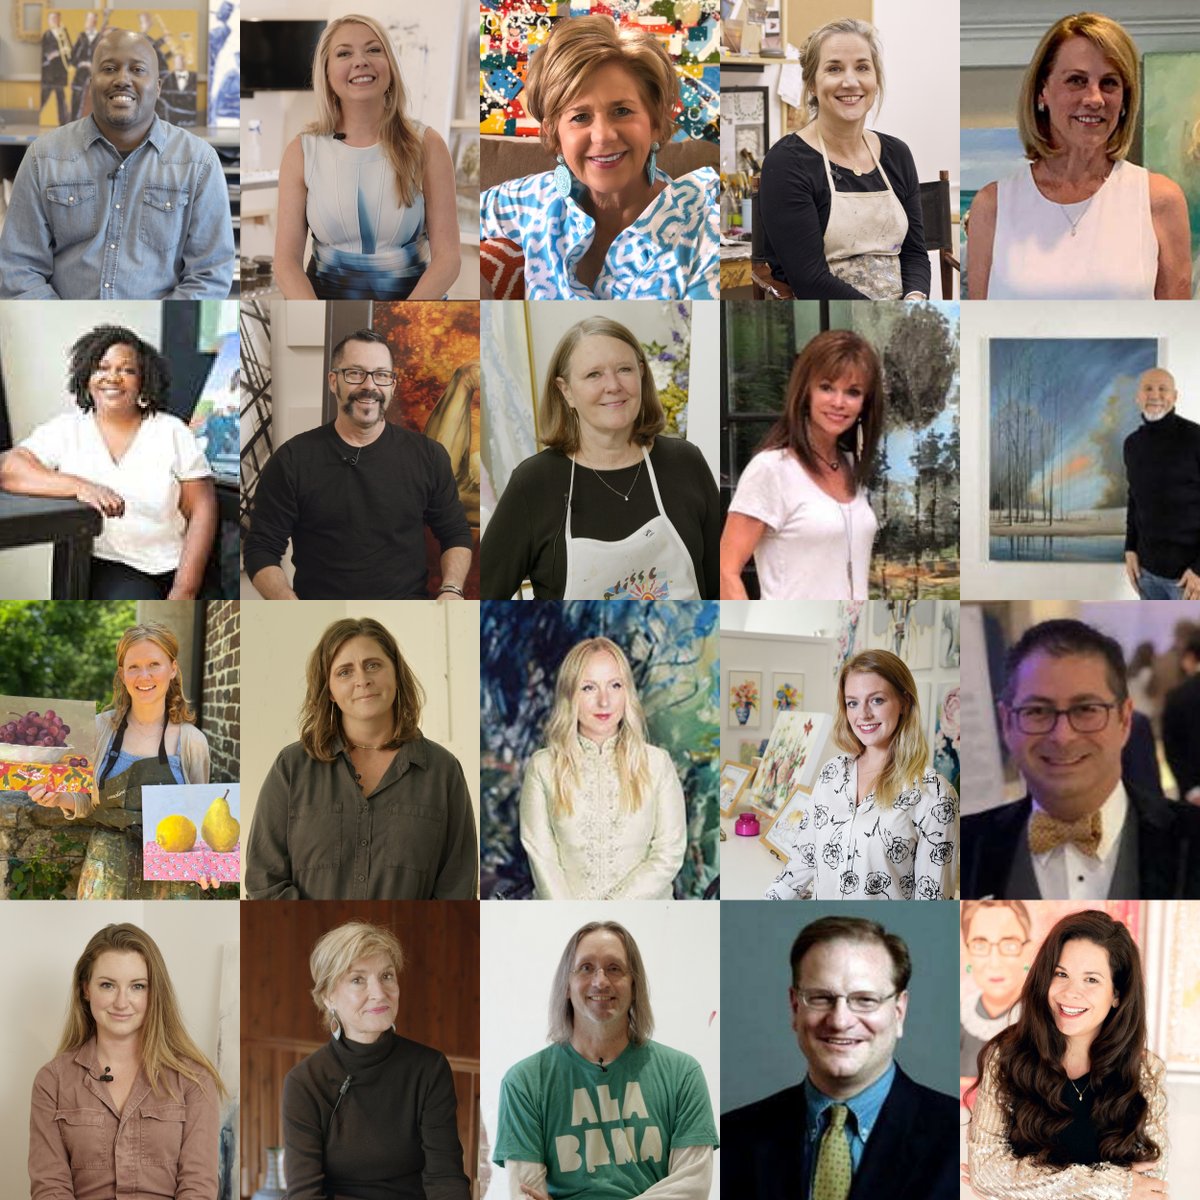 Introducing our #ArtBLINK2023 artists! ✨🎨

We are excited to gather for ArtBLINK once again and cannot wait to see what each of these talented local artists creates. 

The 38th annual ArtBLINK Gala will be held on February 4, 2023. Learn more at artblink.org.